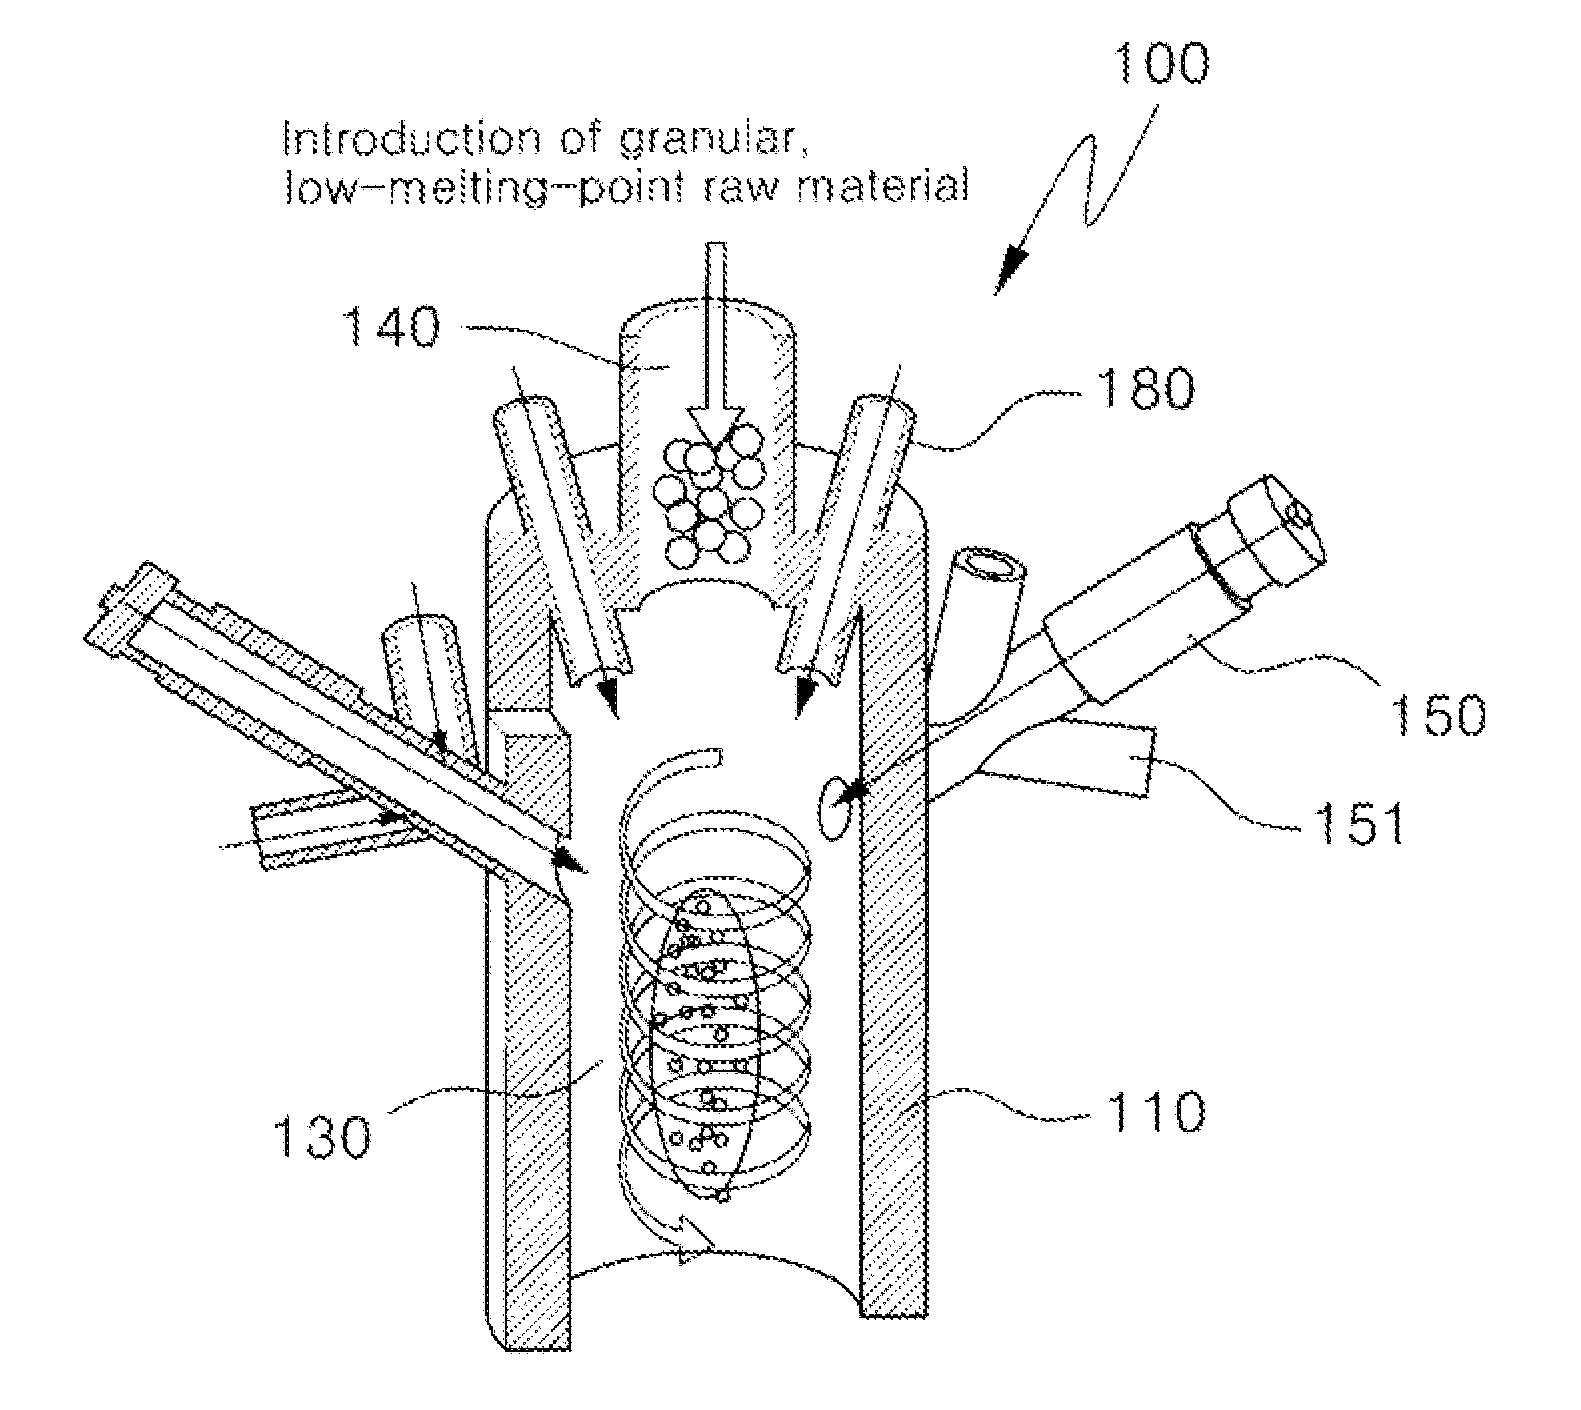 Low-carbon-type in-flight melting furnace utilizing combination of plasma heating and gas combustion, melting method utilizing the same and melting system utilizing the same